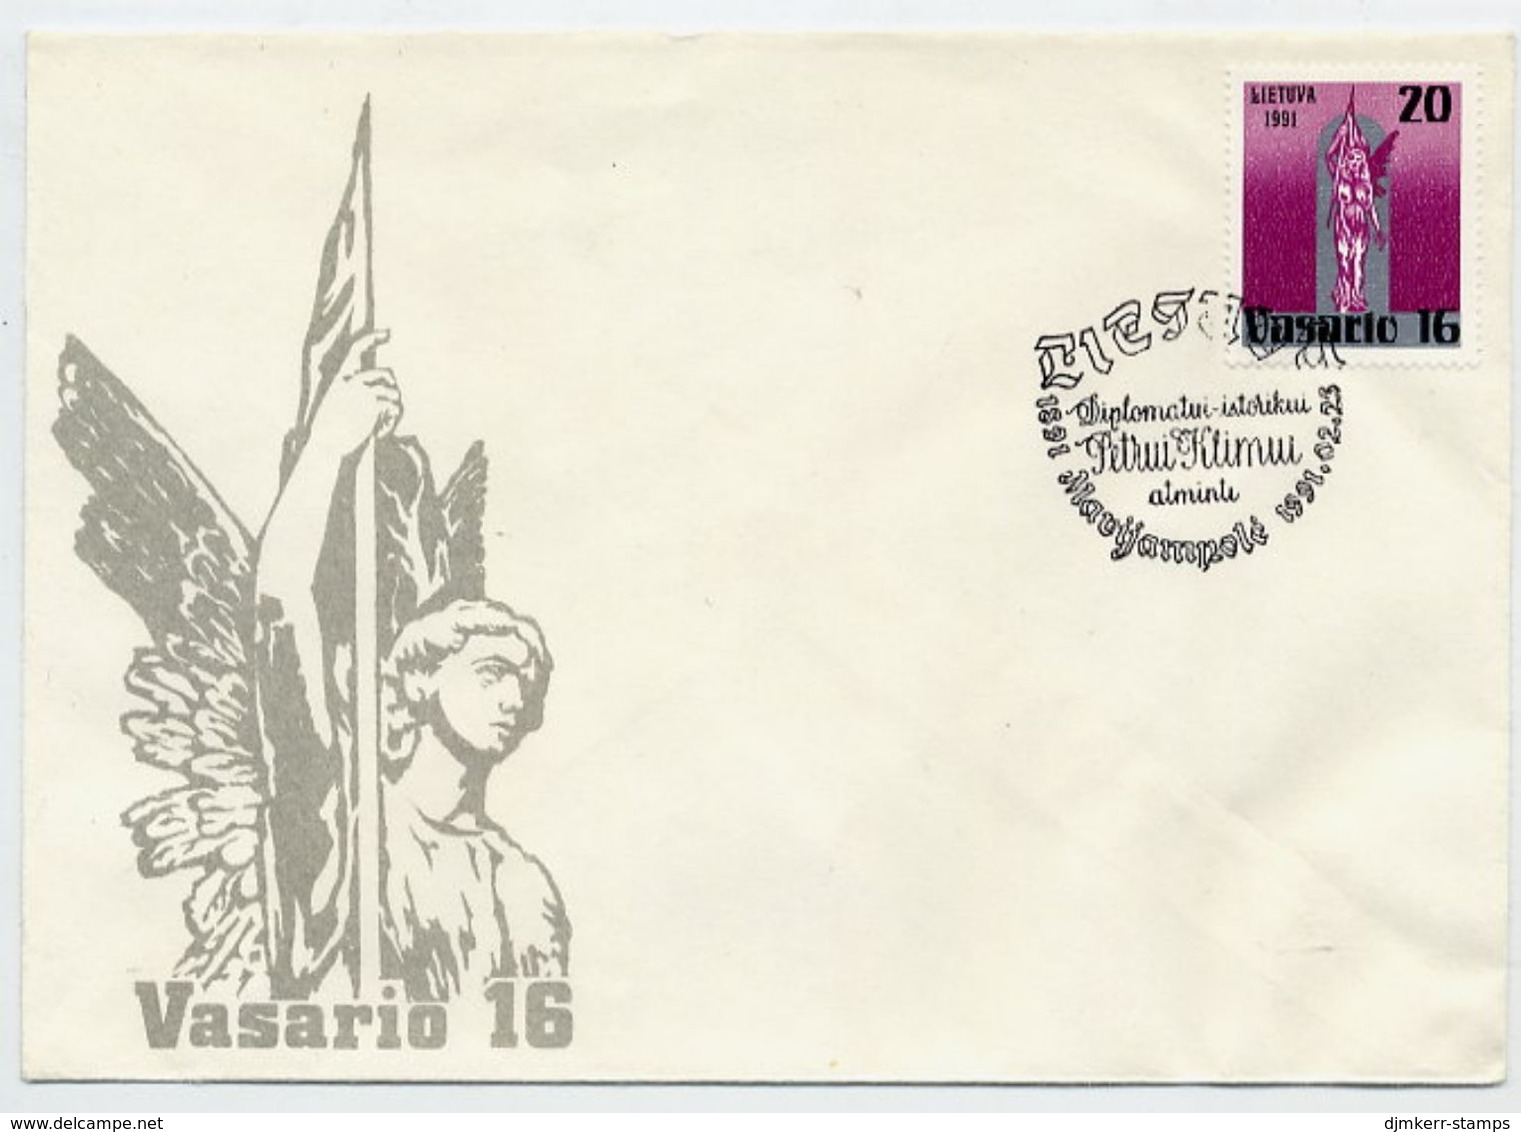 LITHUANIA 1991 Anniversary Of Republic On FDC.  Michel 470 - Lithuania